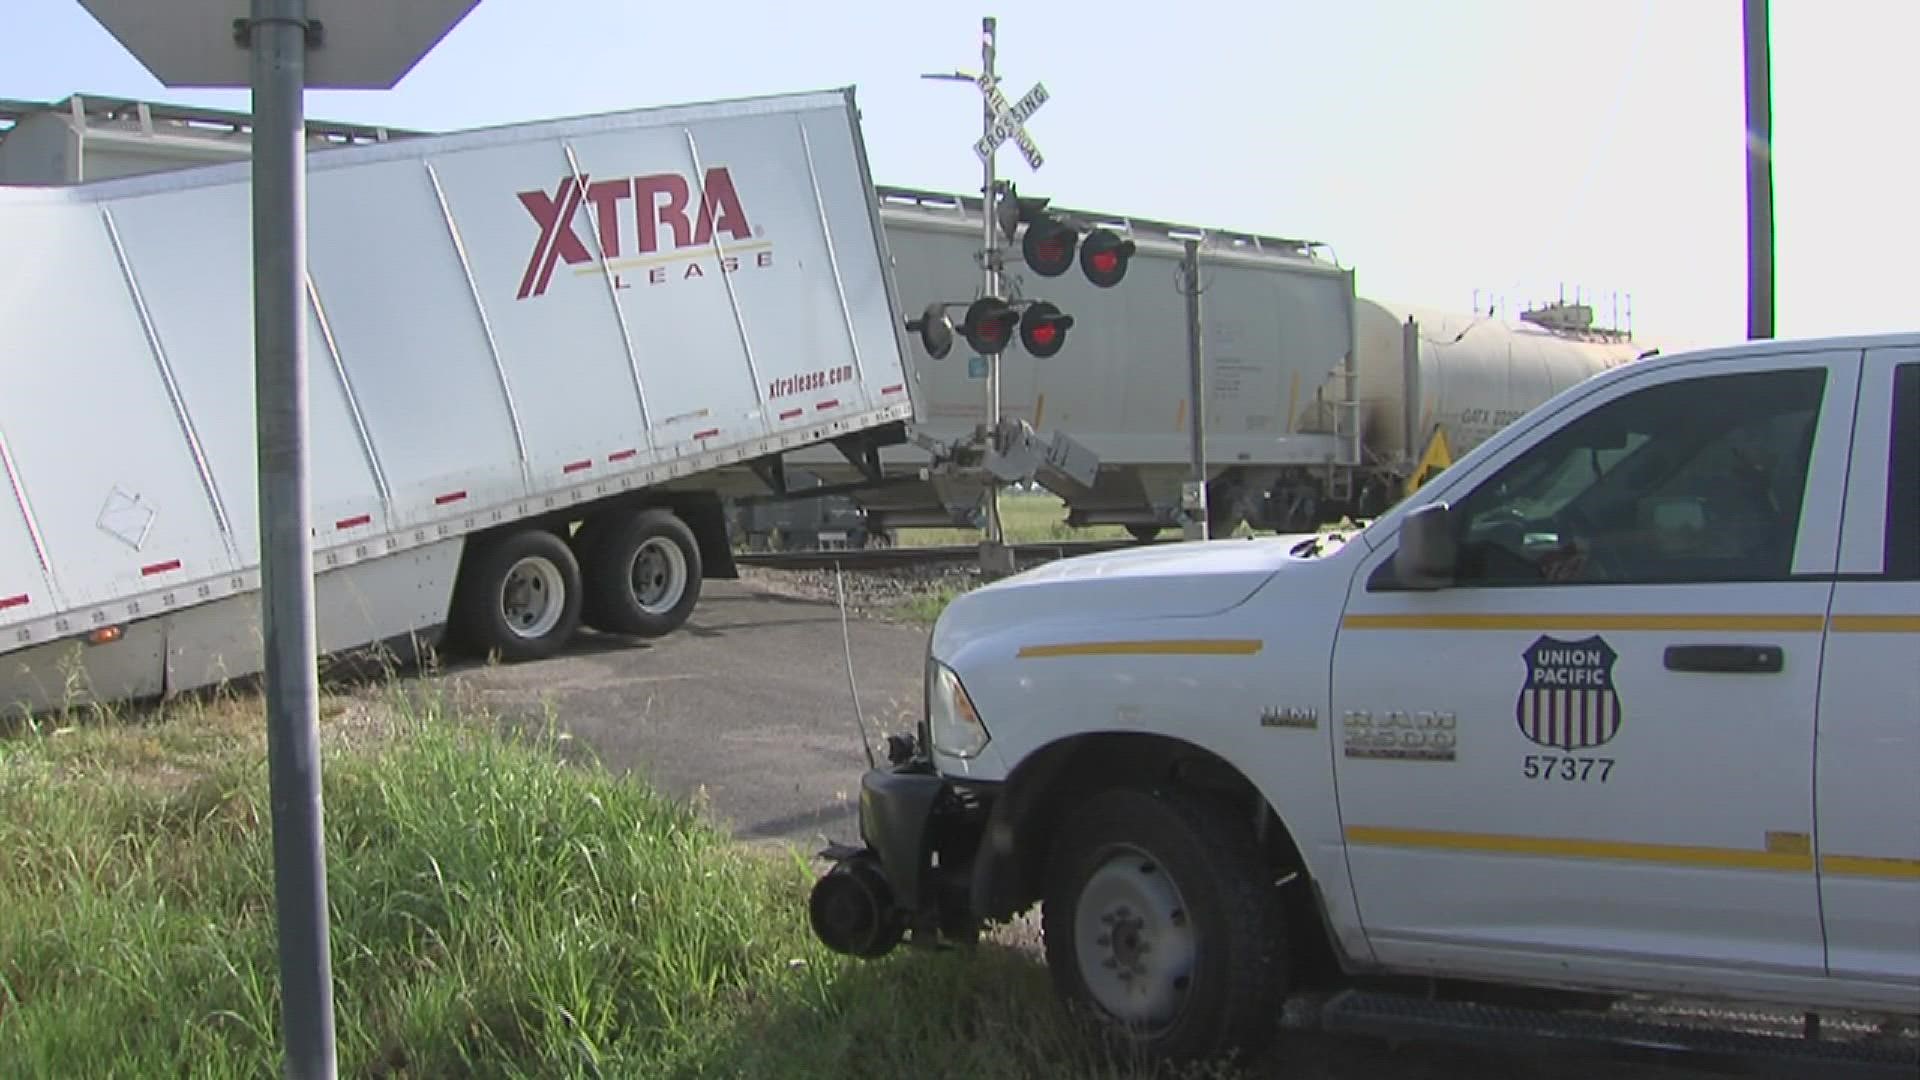 The trailer was struck at at the crossing at Thompson Road near China.